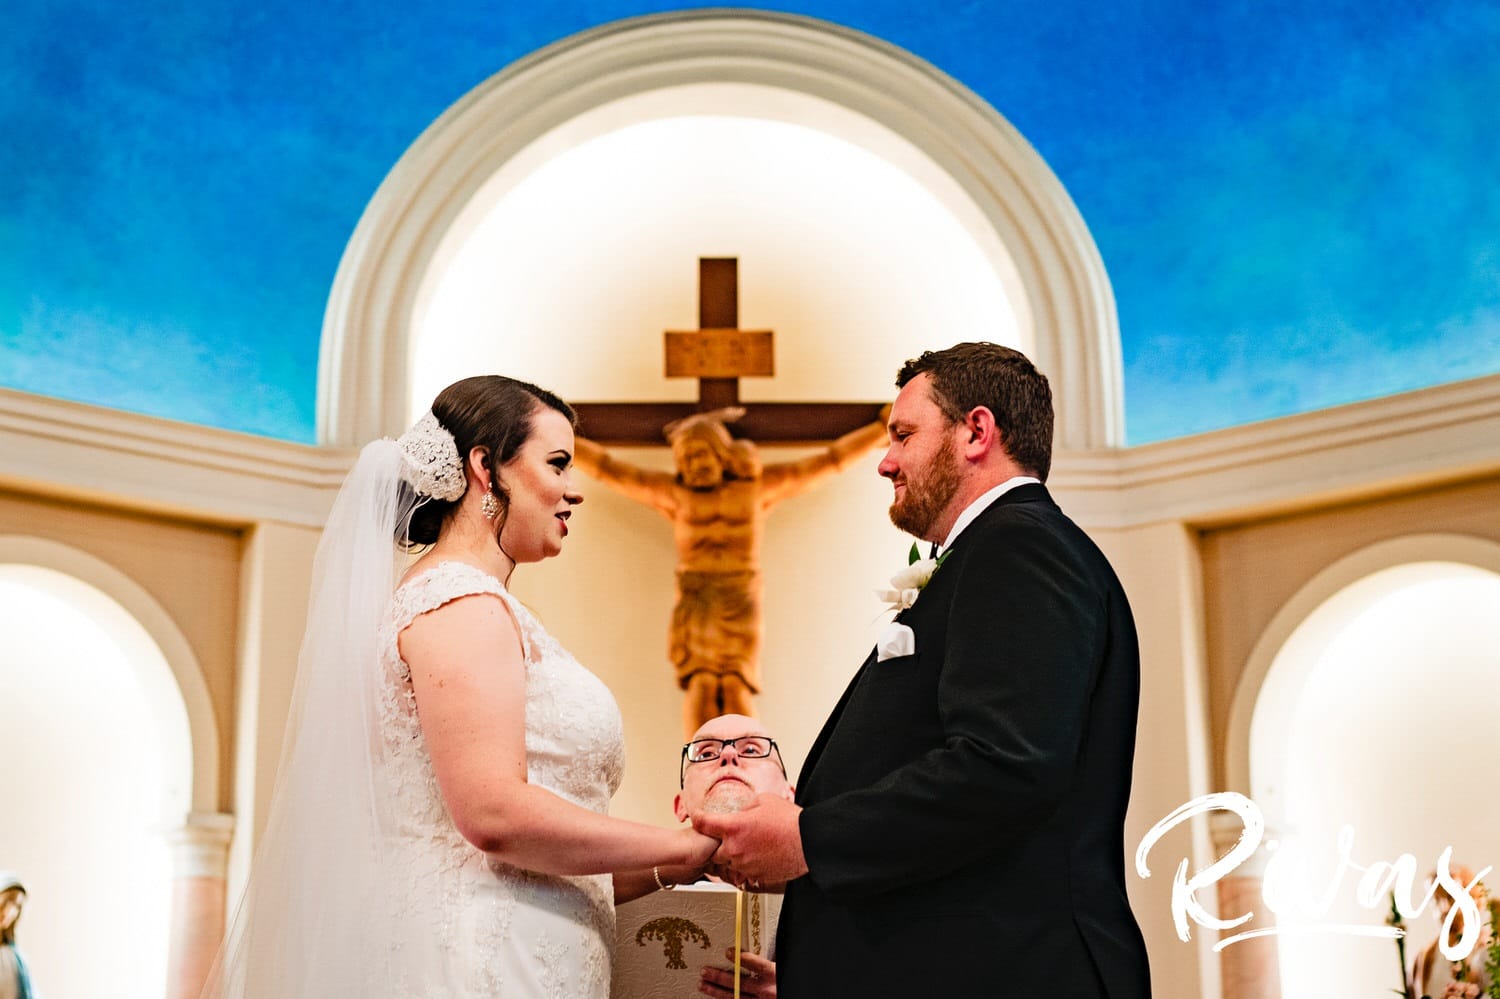 A vibrant picture of a bride and groom holding hands and smiling at each other as they exchange vows and rings during their wedding ceremony in Lawrence, Kansas. 